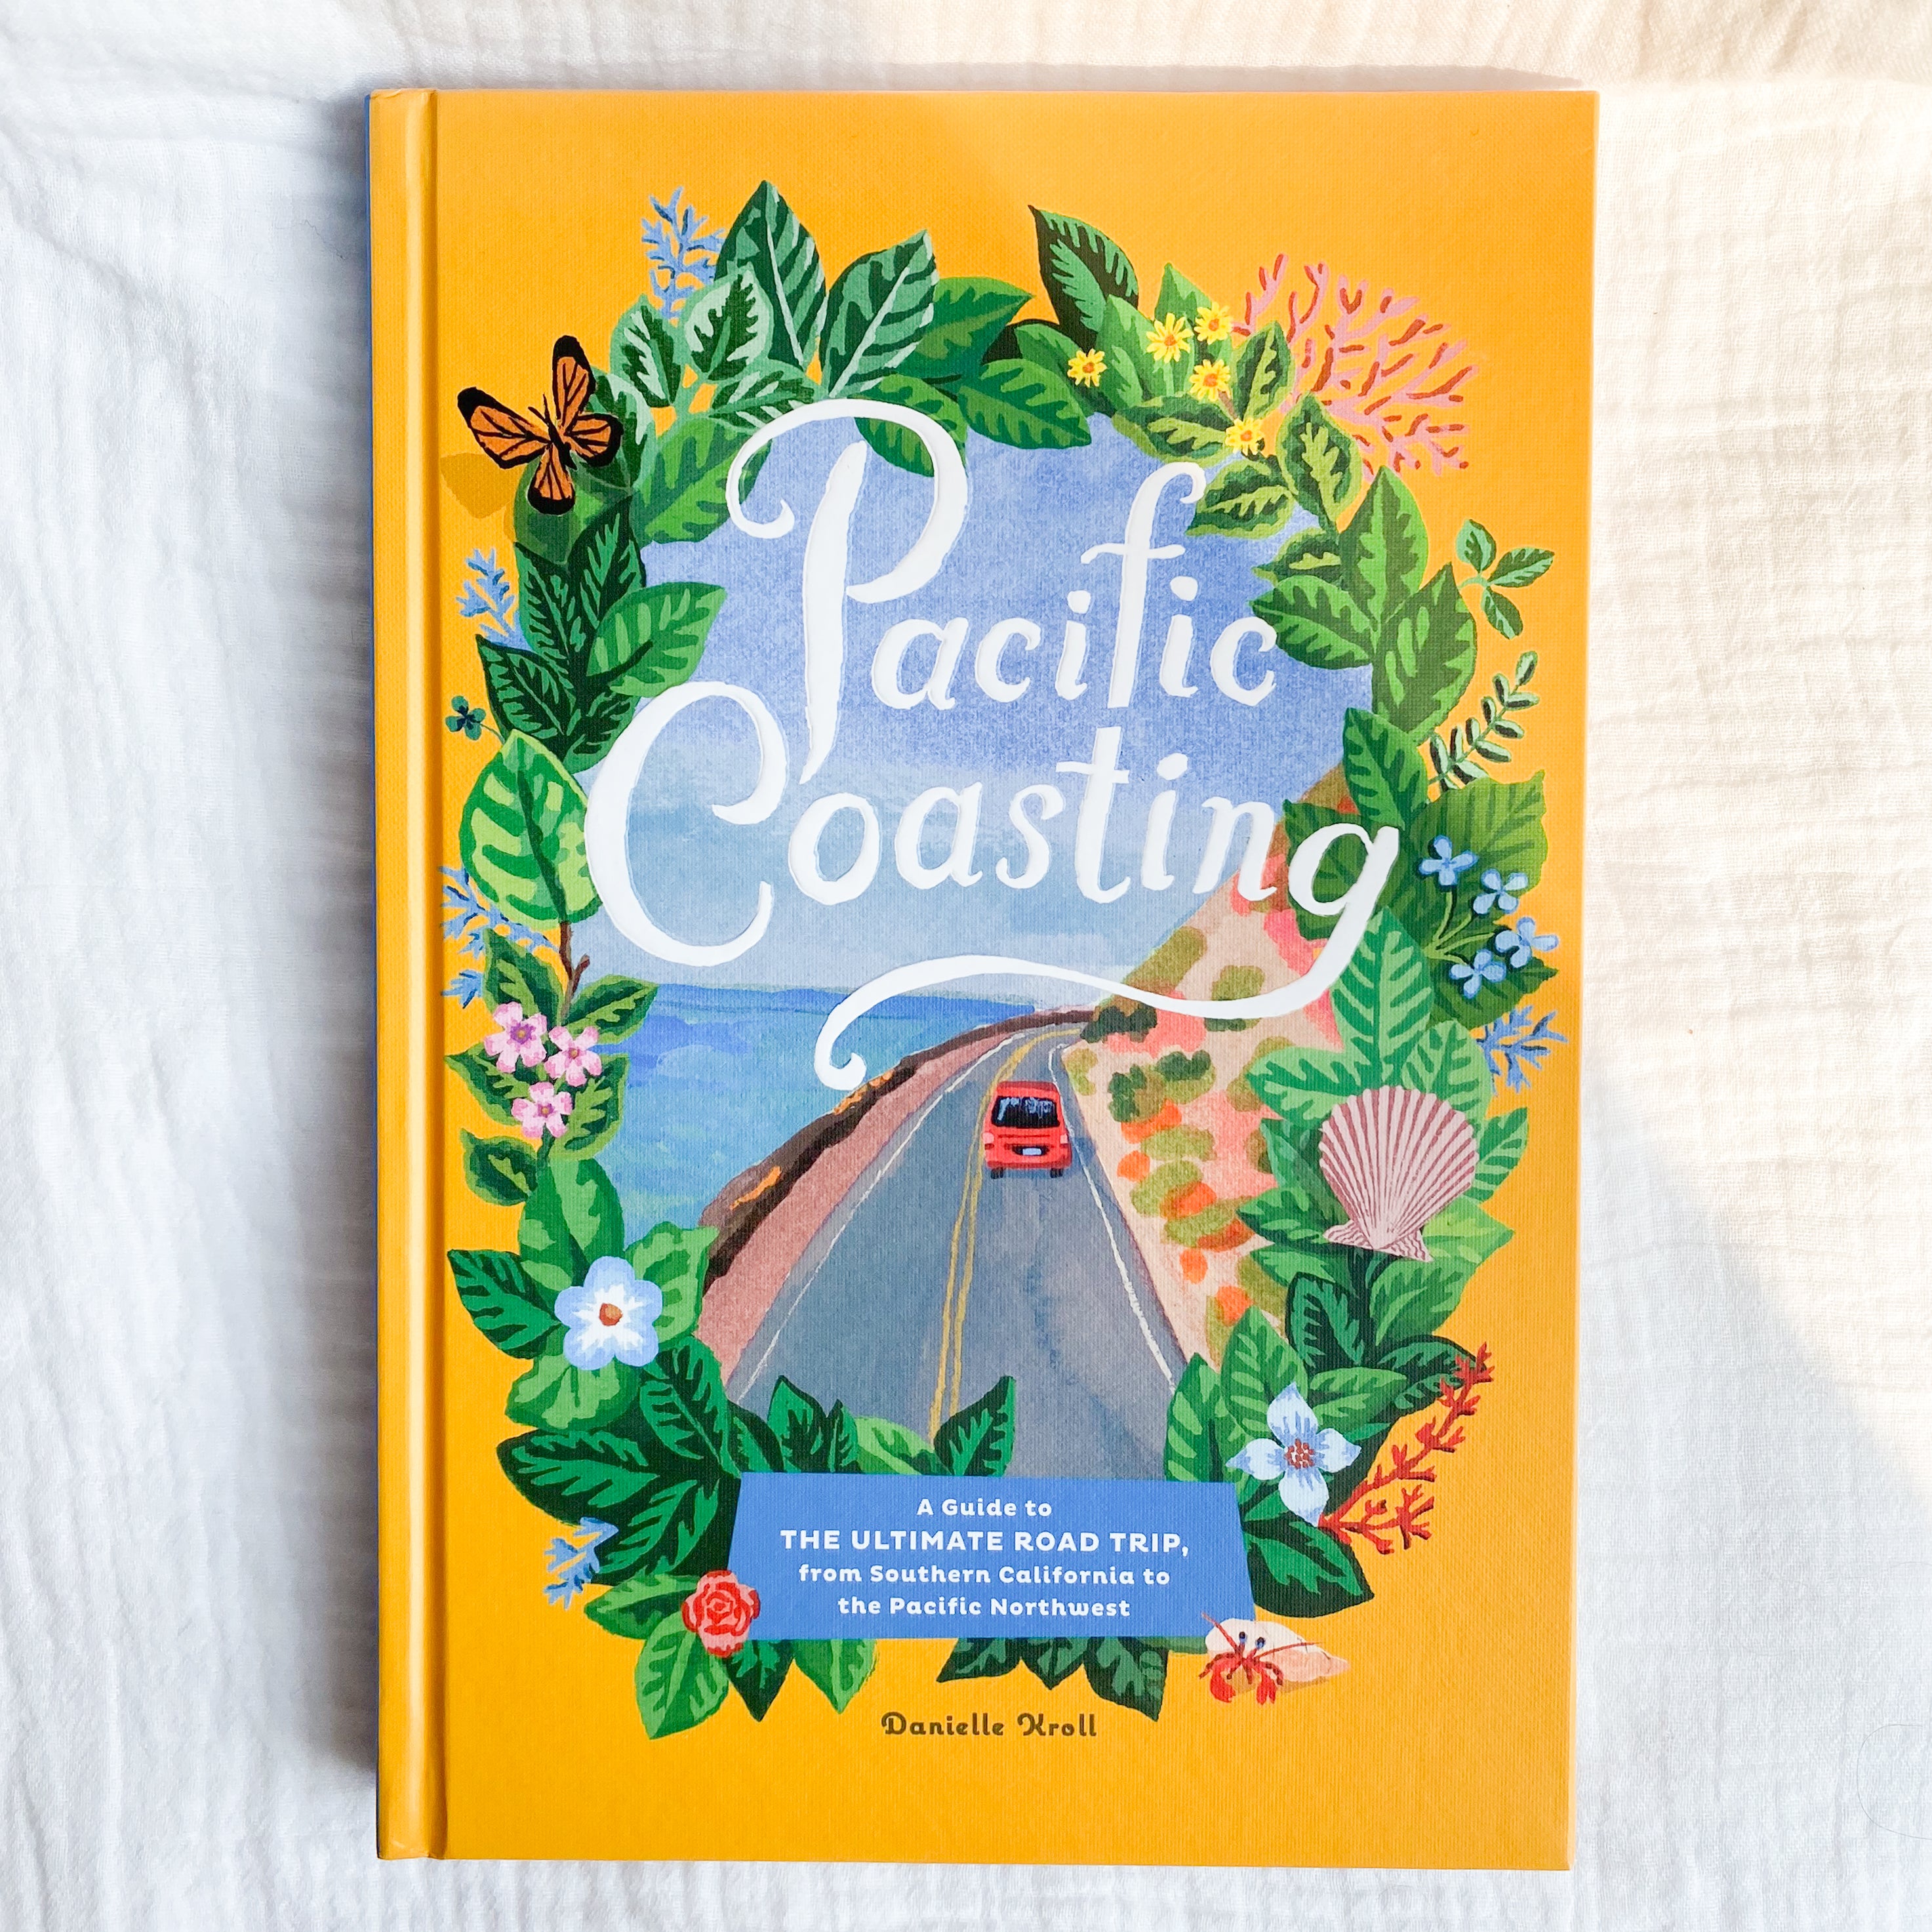 Pacific Coasting: A Guide To The Ultimate Road Trip